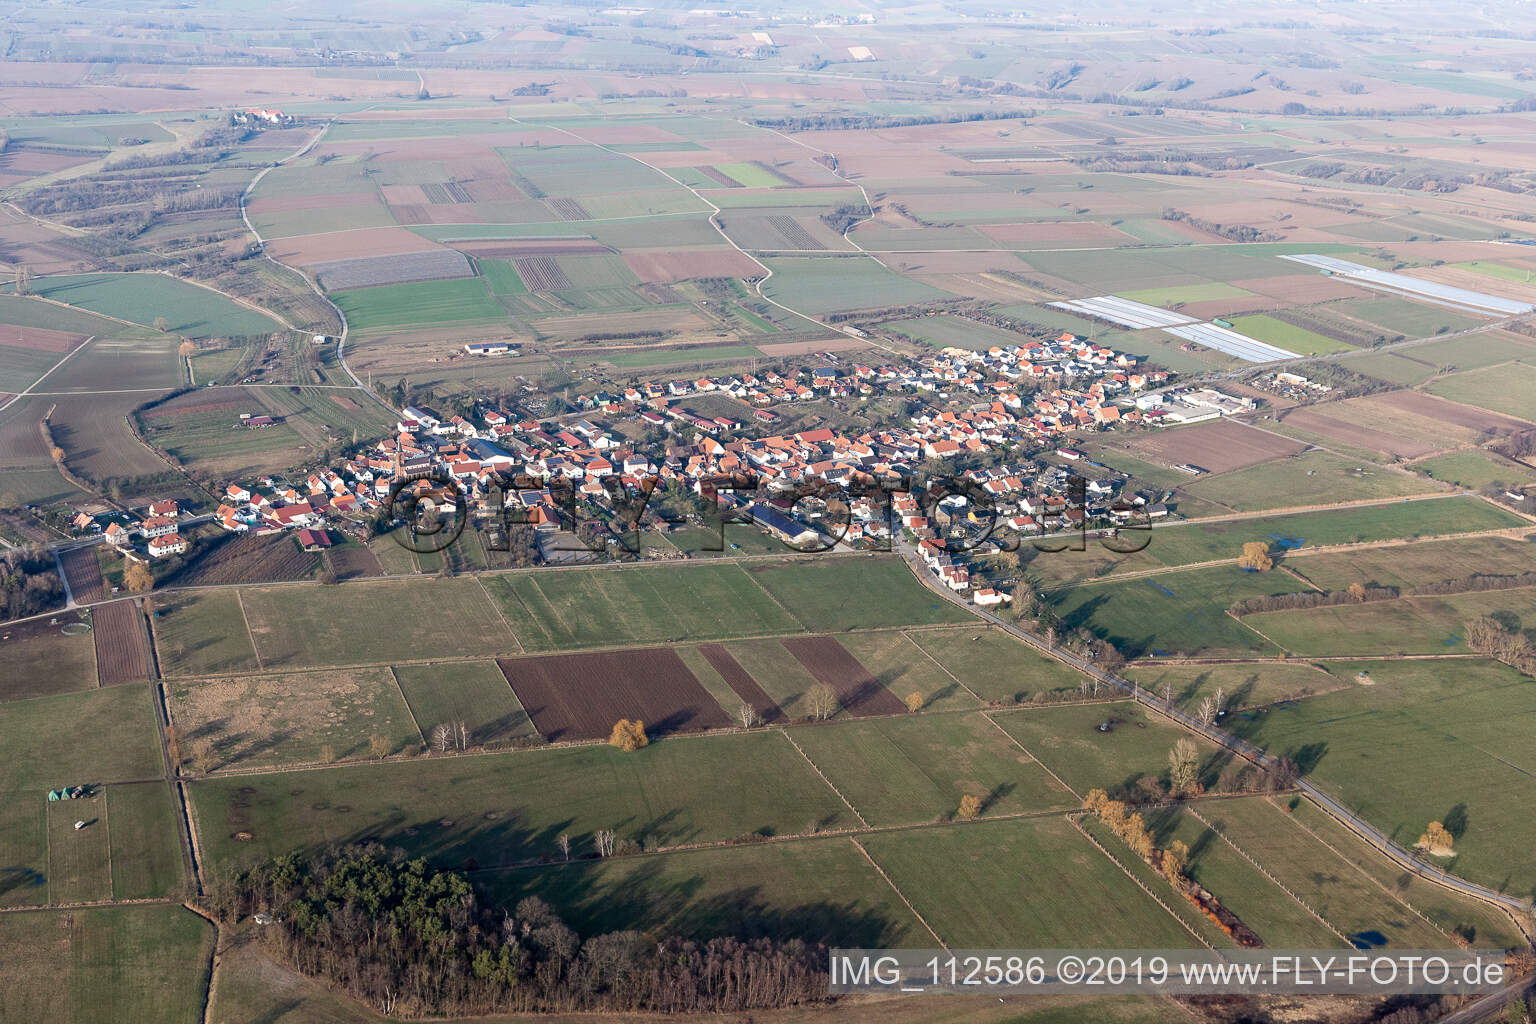 Schweighofen in the state Rhineland-Palatinate, Germany from above